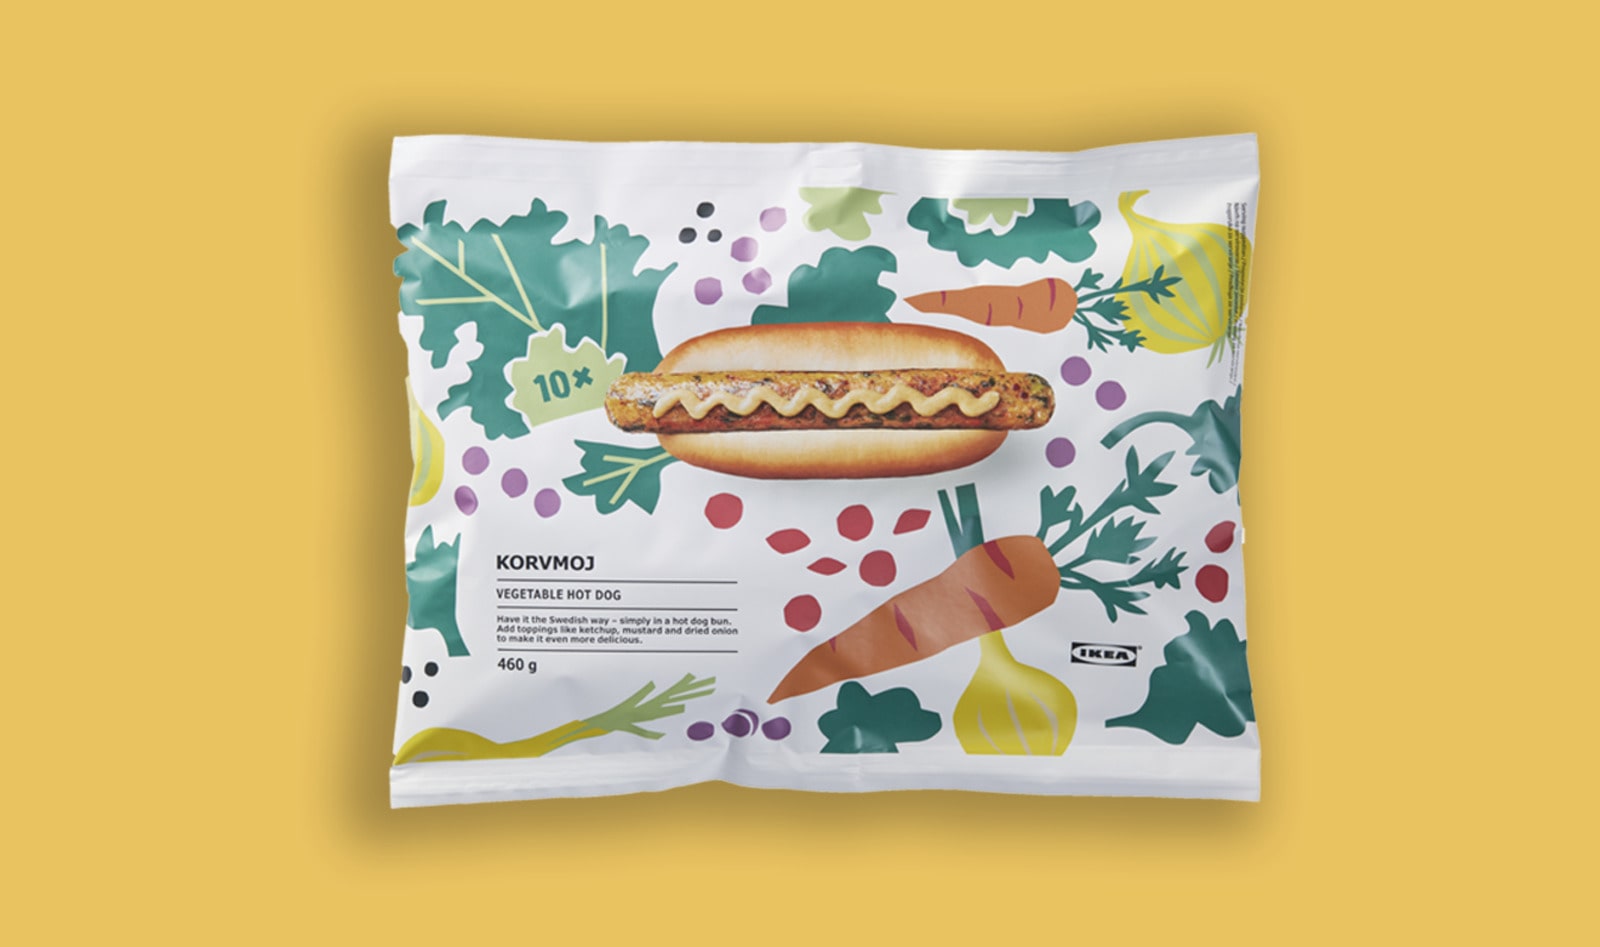 IKEA Now Sells 10-Packs of Vegan Hot Dogs So You Can Make Them at Home